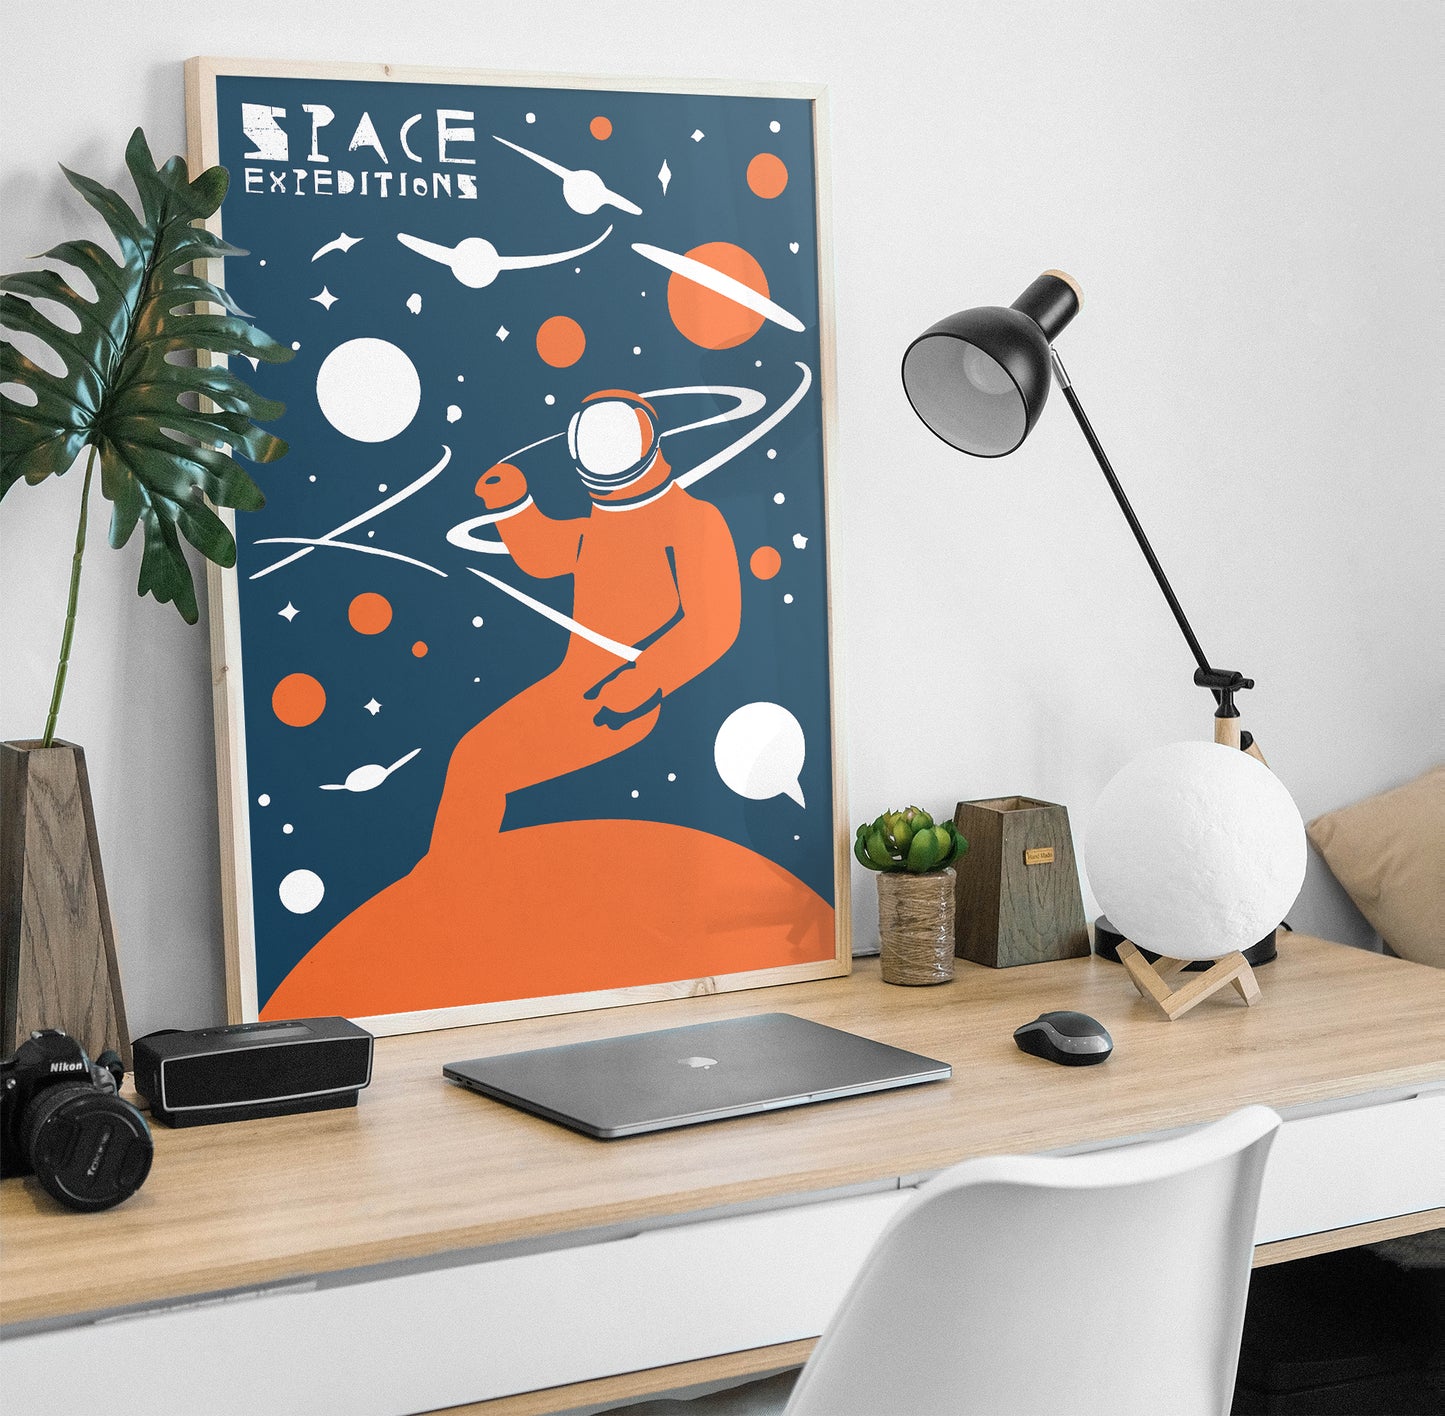 Space Expeditions Poster